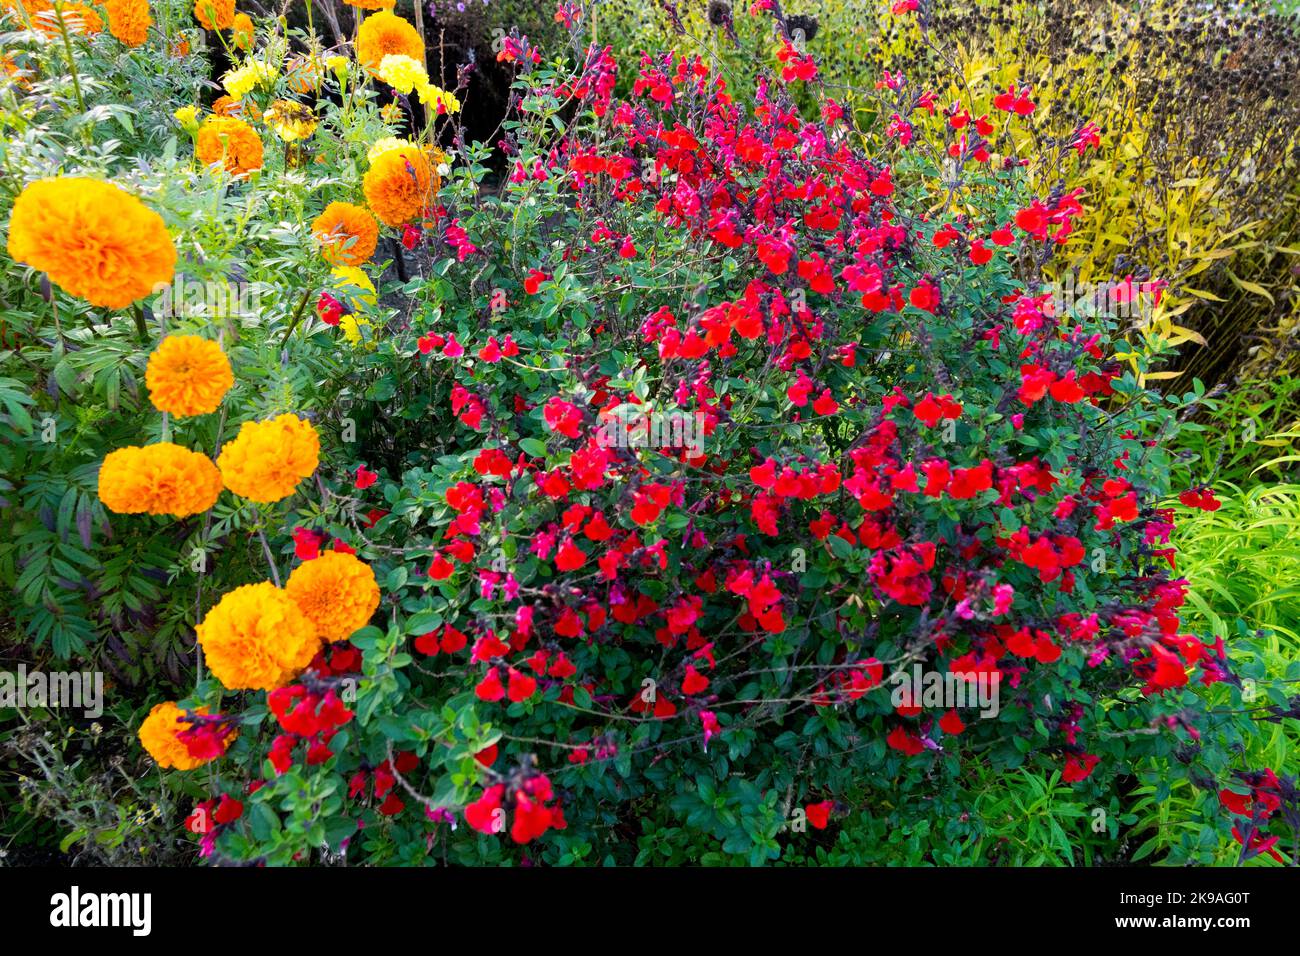 Salvia microphylla 'Royal Bumble', Tagetes erecta, African marigold, Flower bed, Red, Orange, Bed Plants Stock Photo